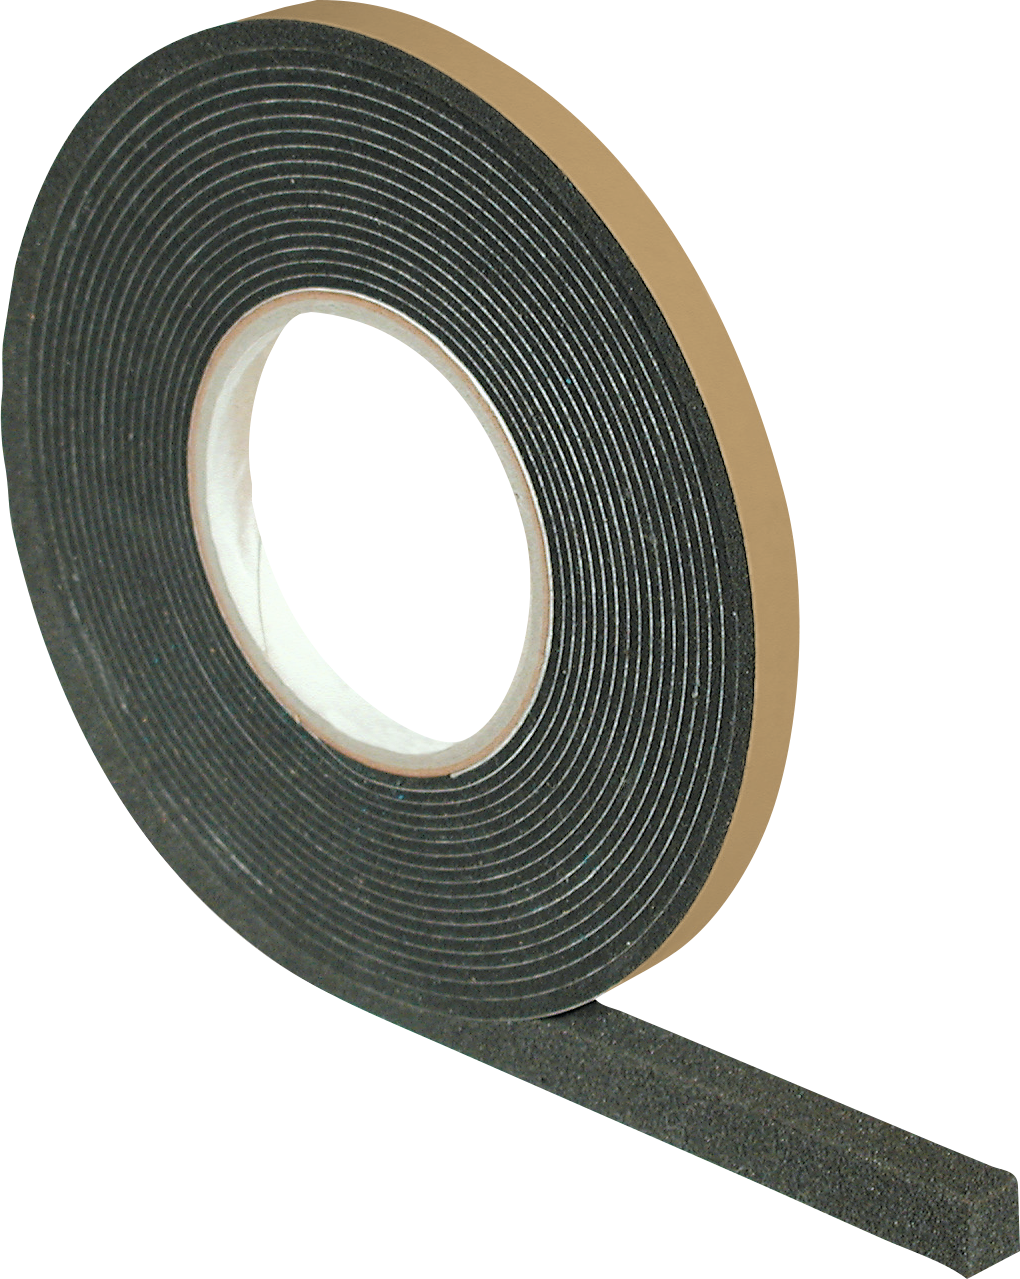 OTTO FUGENBAND BG1 15/3 A VE 70M 10M/ROLLE